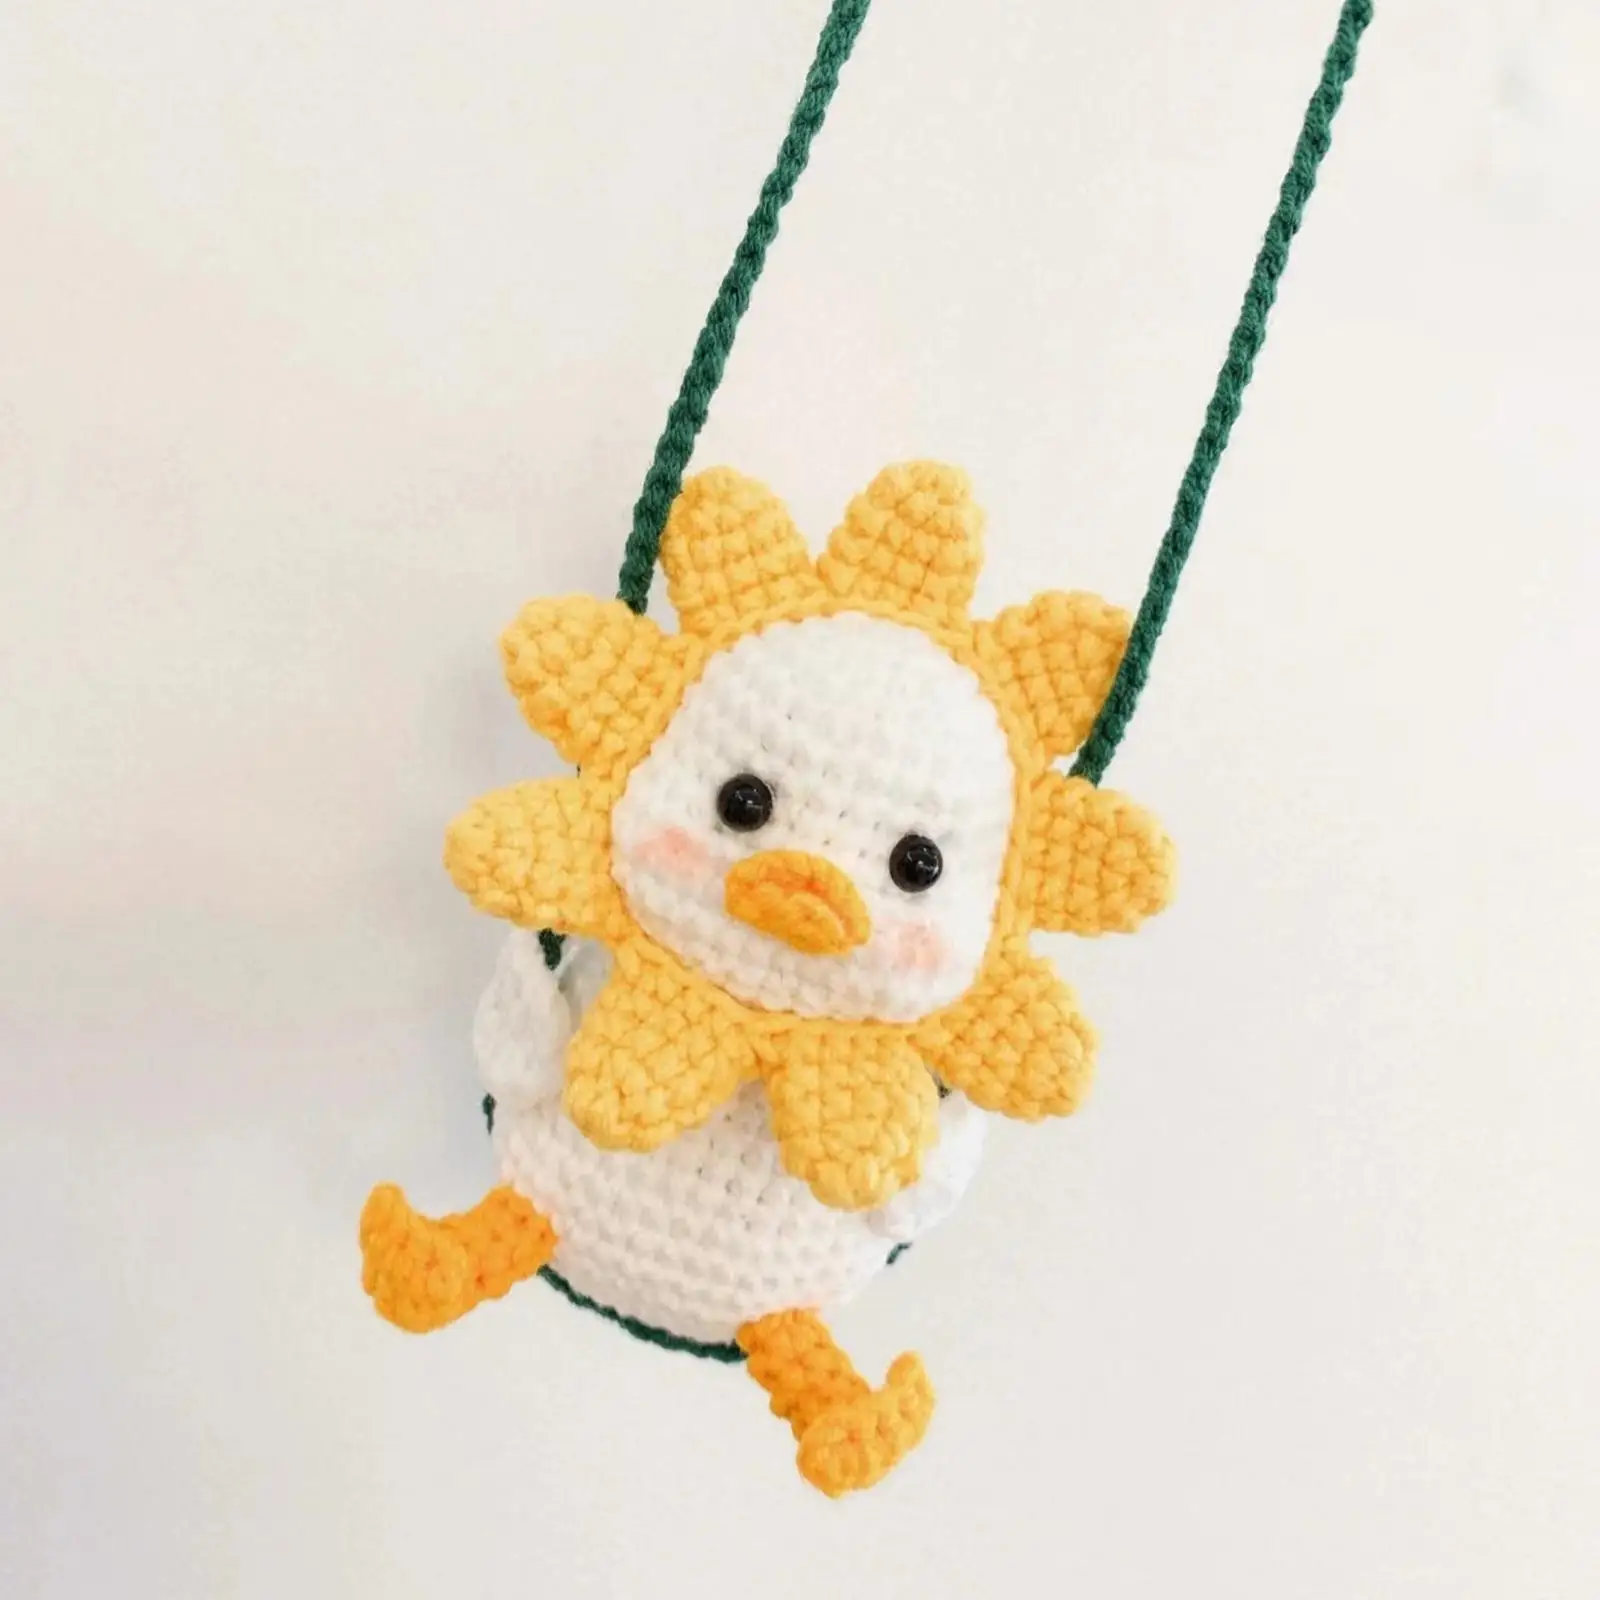 Crochet Set, Duck DIY Hand Made Crocheting Craft Needlework Pendant for Home Decoration Adults and Kids Teens Gift